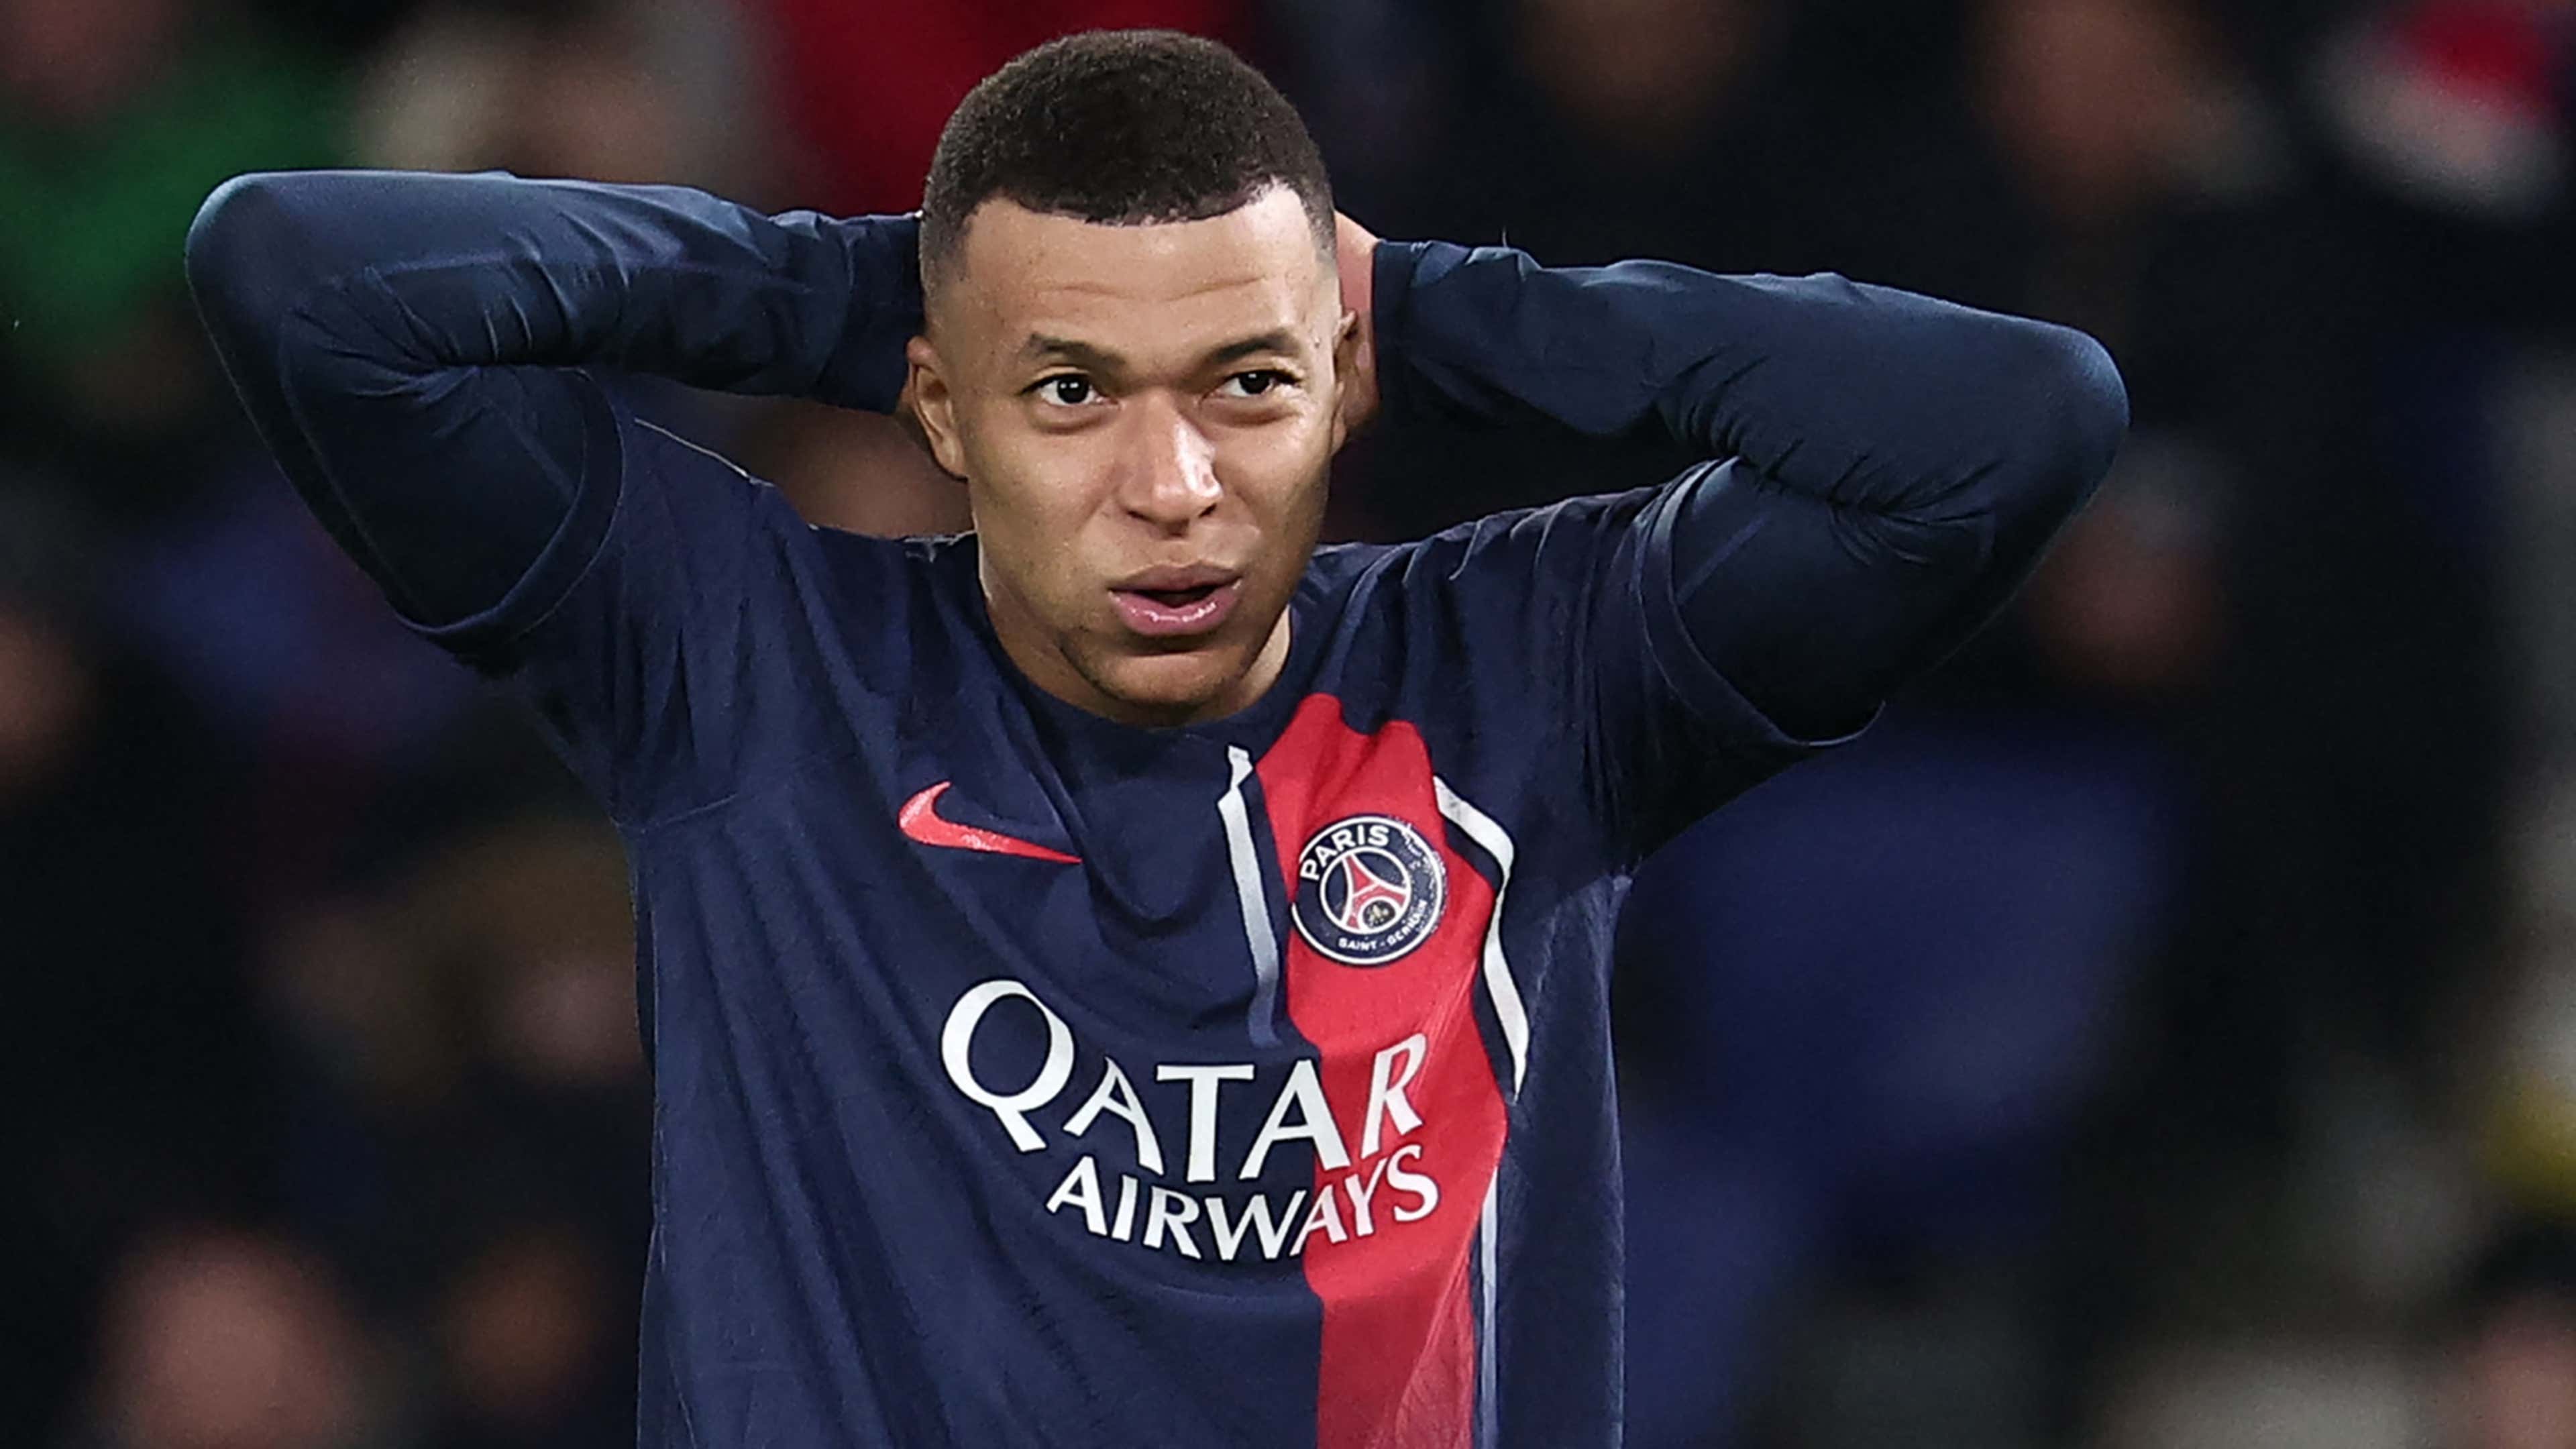 The trade that could finally bring Kylian Mbappé to Manchester United